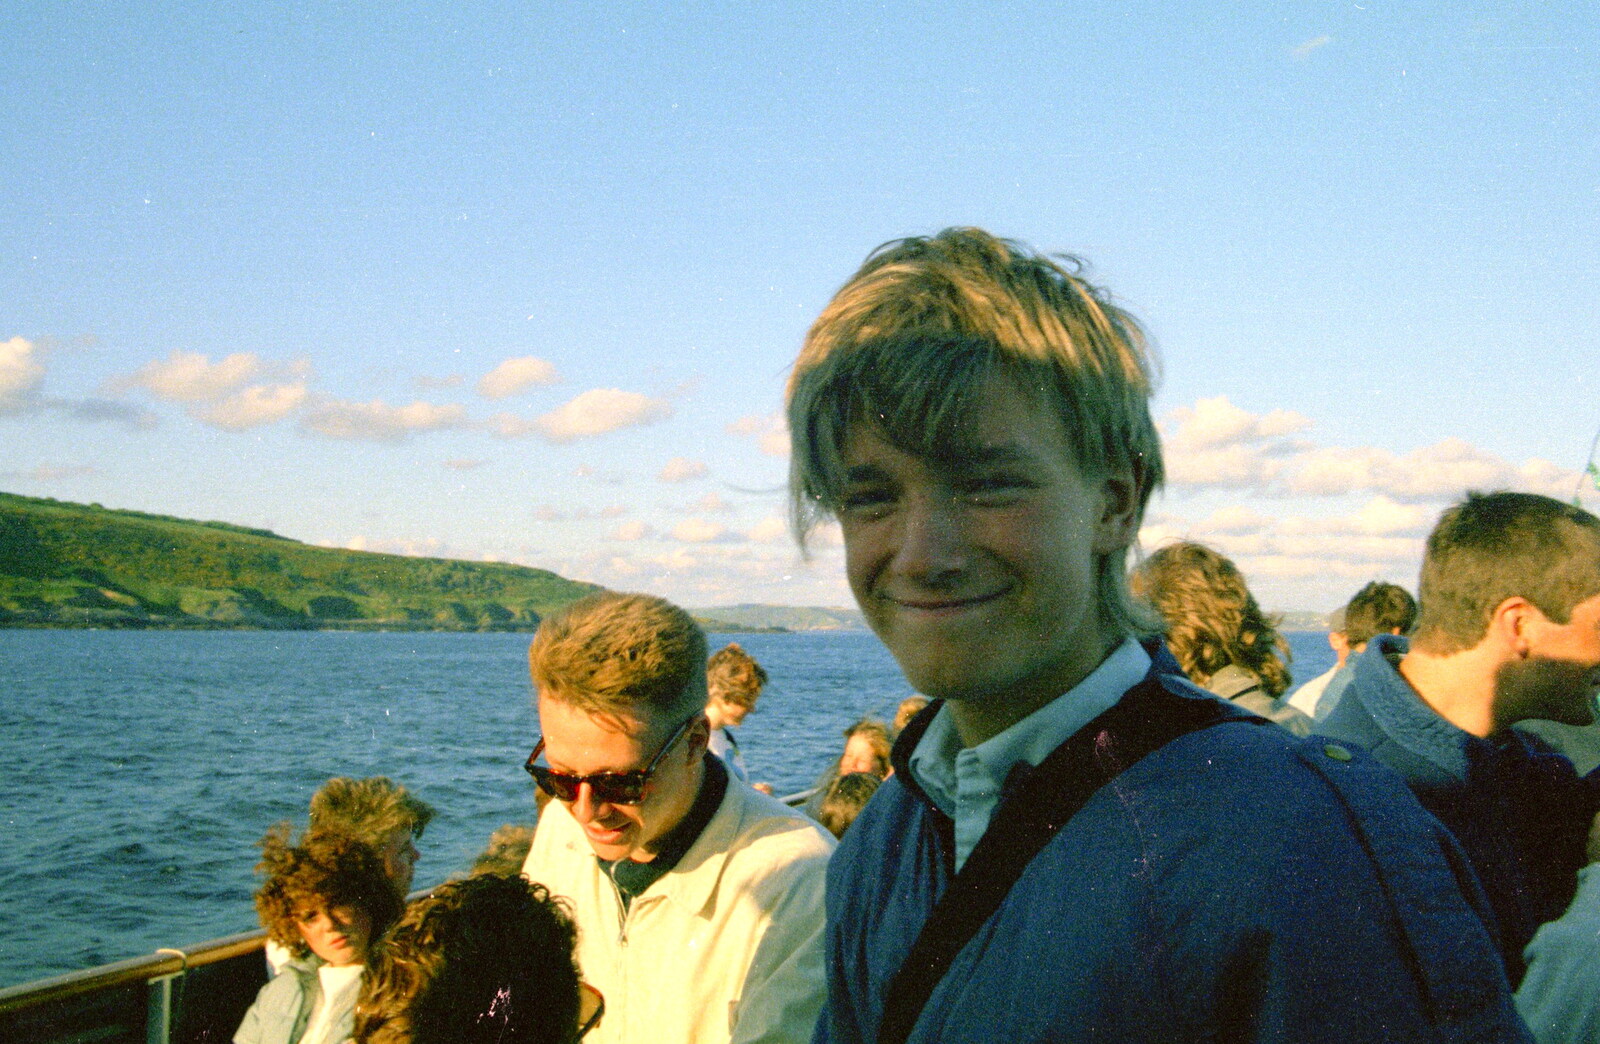 Nosher looks a bit nerdy from Uni: A Student Booze Cruise, Plymouth Sound, Devon - 2nd May 1986